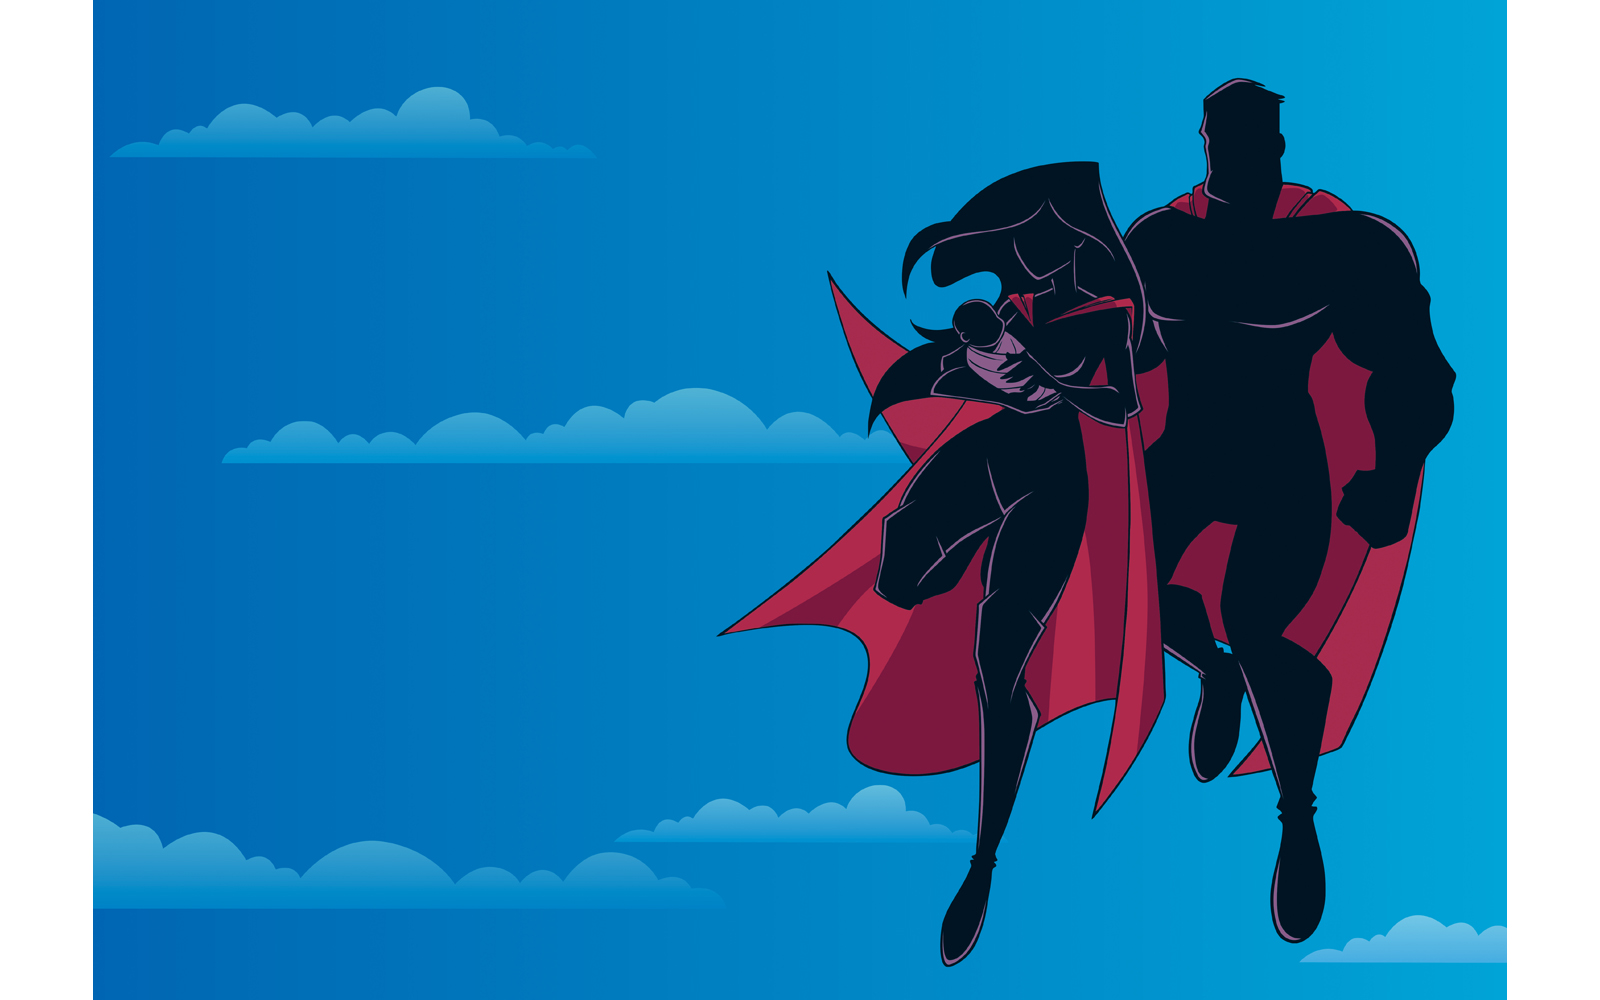 Super Mom Dad and Baby Sky Silhouette - Illustration